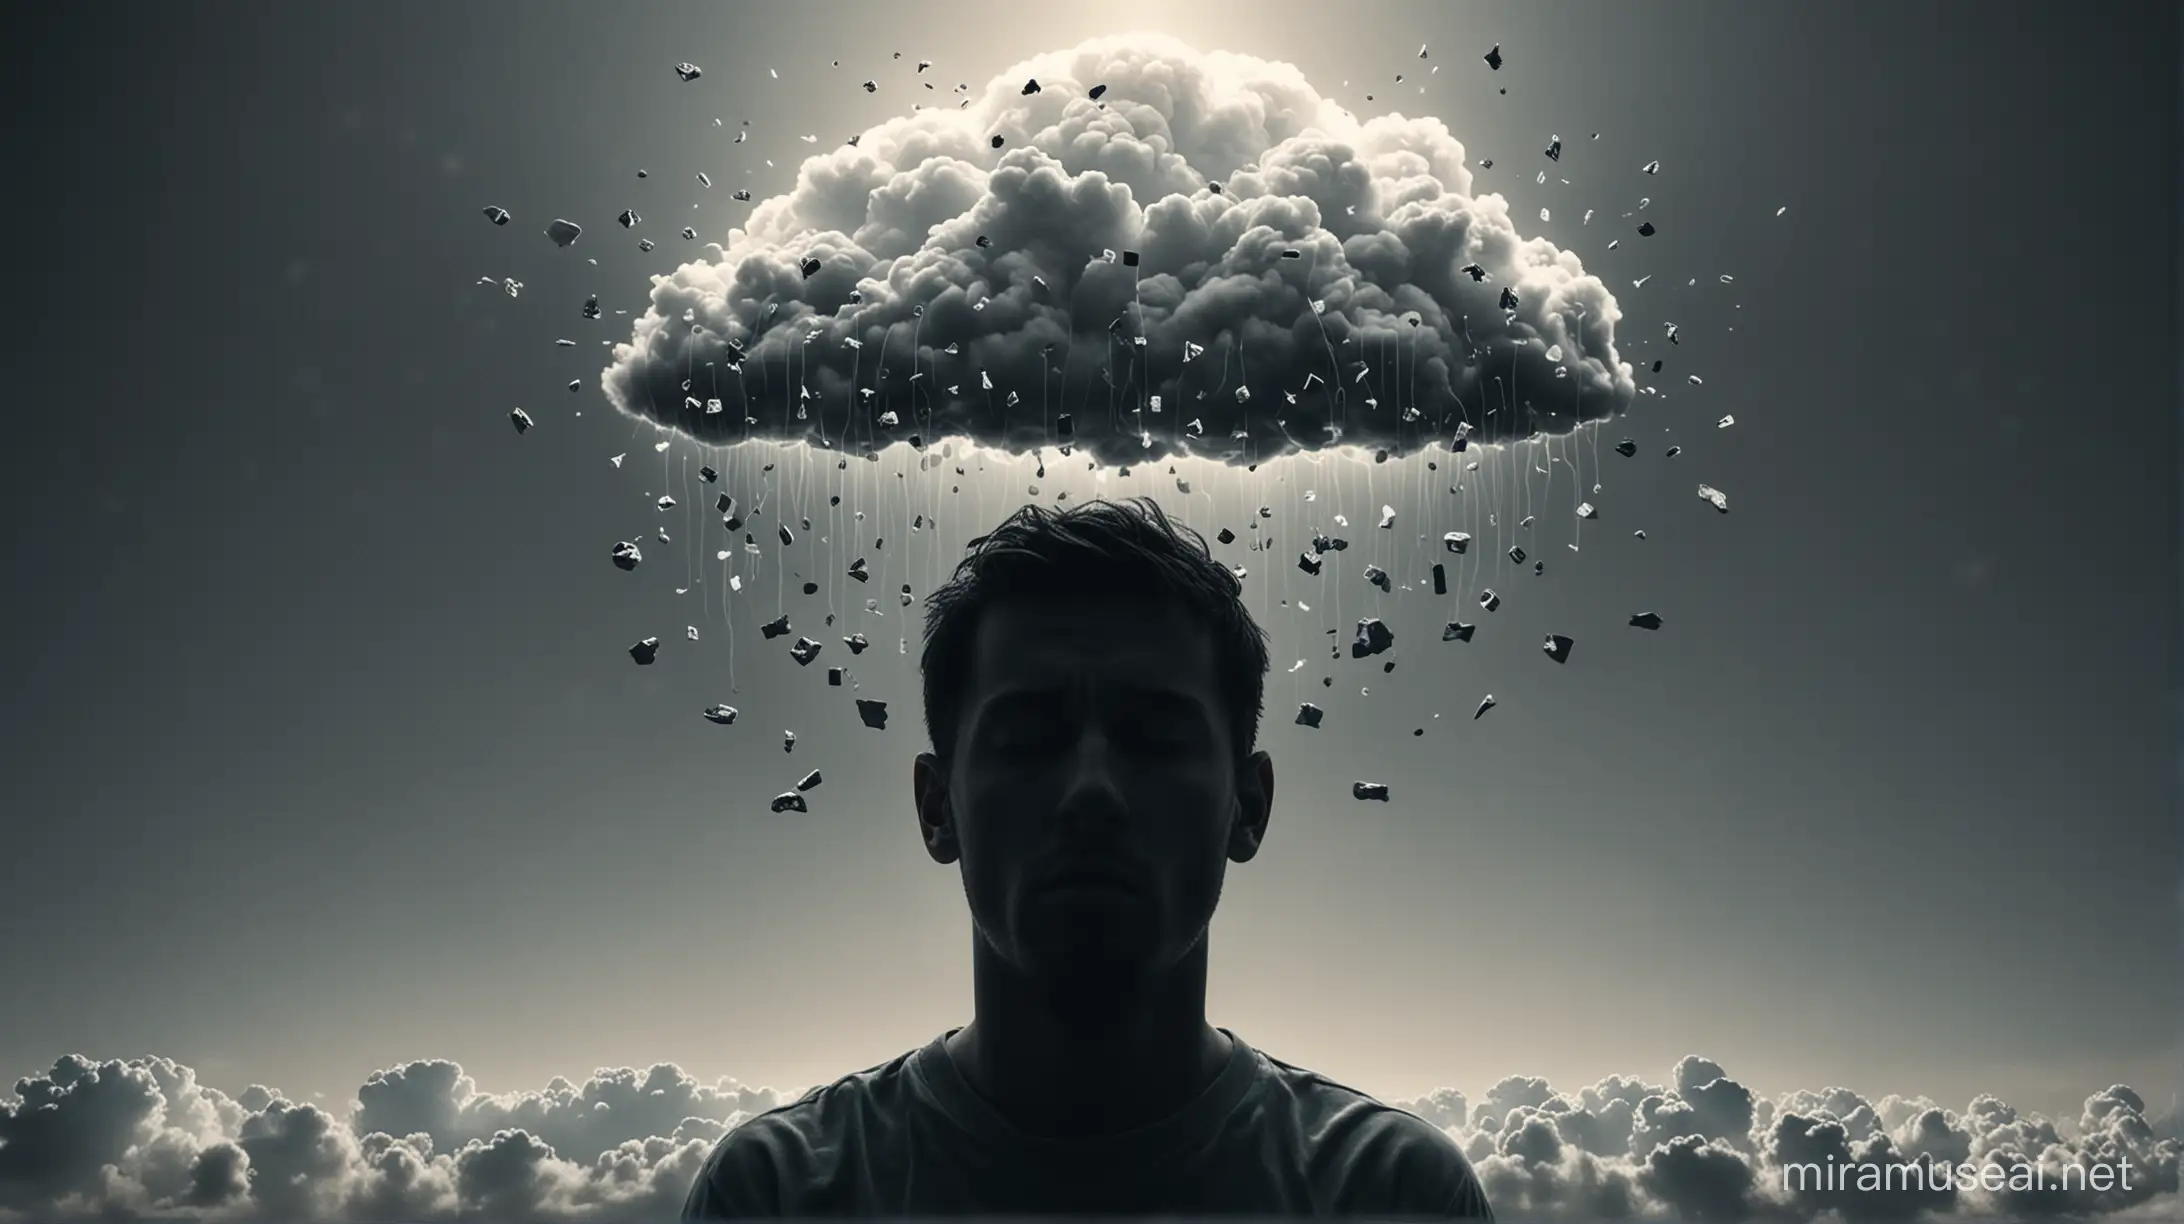 The thumbnail contains a central image. On the left side, there is a symbolic representation of a person under stress, perhaps depicting a silhouette with a cloud of chaotic thoughts around his head. This half of the picture conveys the theme of mental exhaustion and the enormous pressures that lead to it.
In the middle, between these two contrasting elements, the video title "Mental Burnout | Learn to Relax Before It's Too Late" appears prominently in a clear, easy-to-read font. The title should be big enough to grab viewers' attention and convey the video's message effectively.